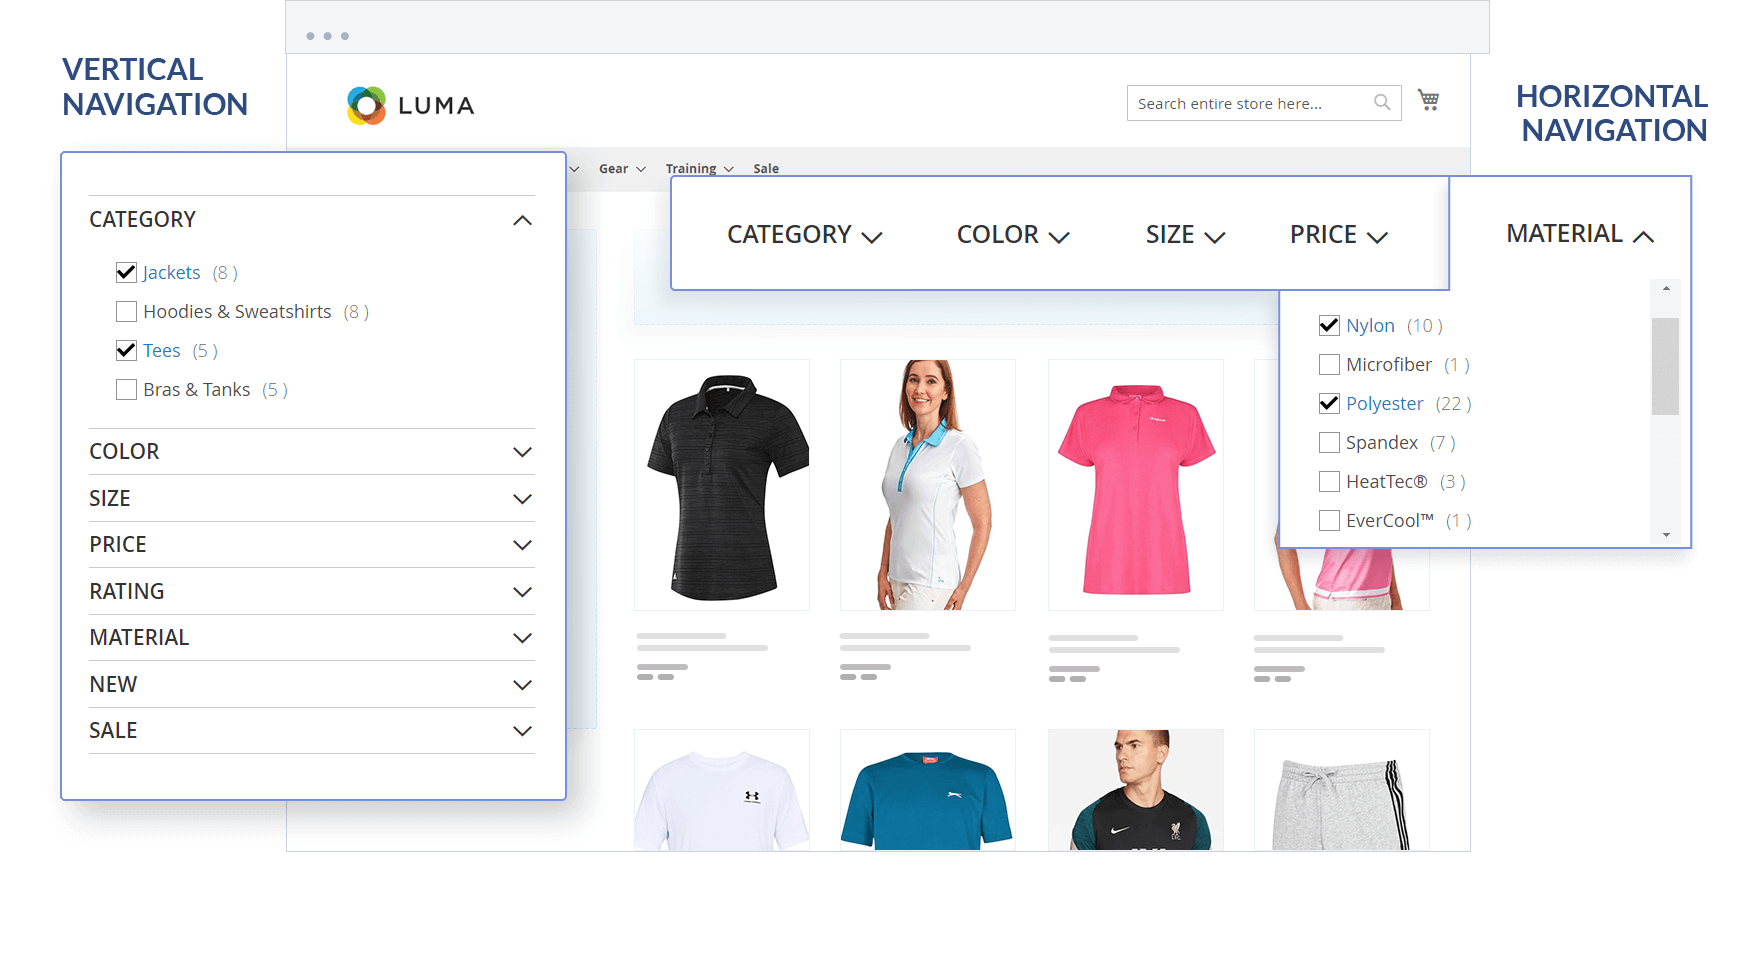 Magento 2 Layered Navigation Extension, Ajax Filter for Improved Layered  Navigation, Custom Product Collection, Horizontal Category Filter